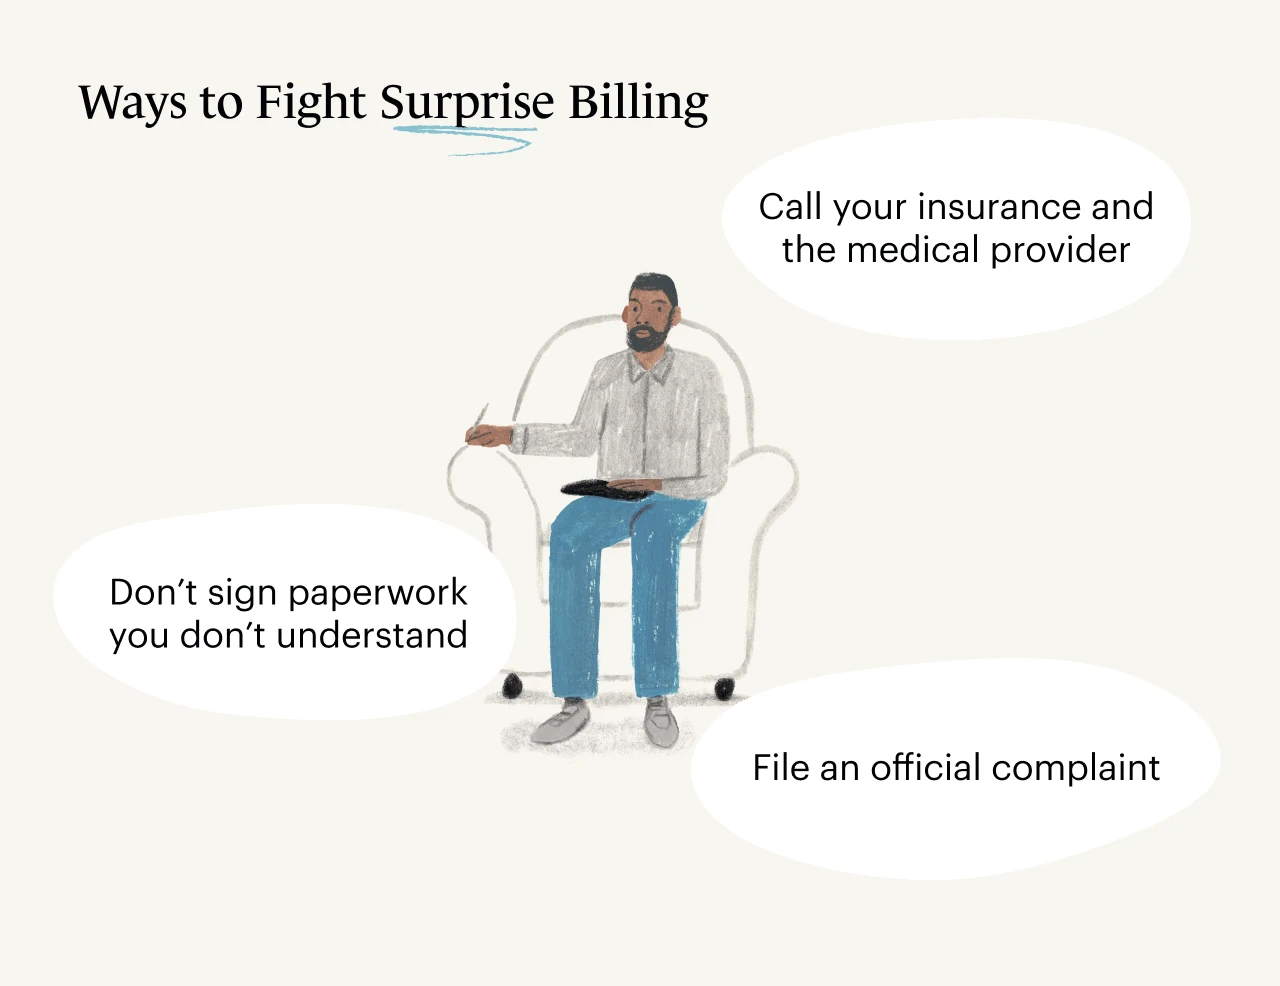 A Monarch original illustration of a man sitting in a chair with examples of ways to fight surprise billing